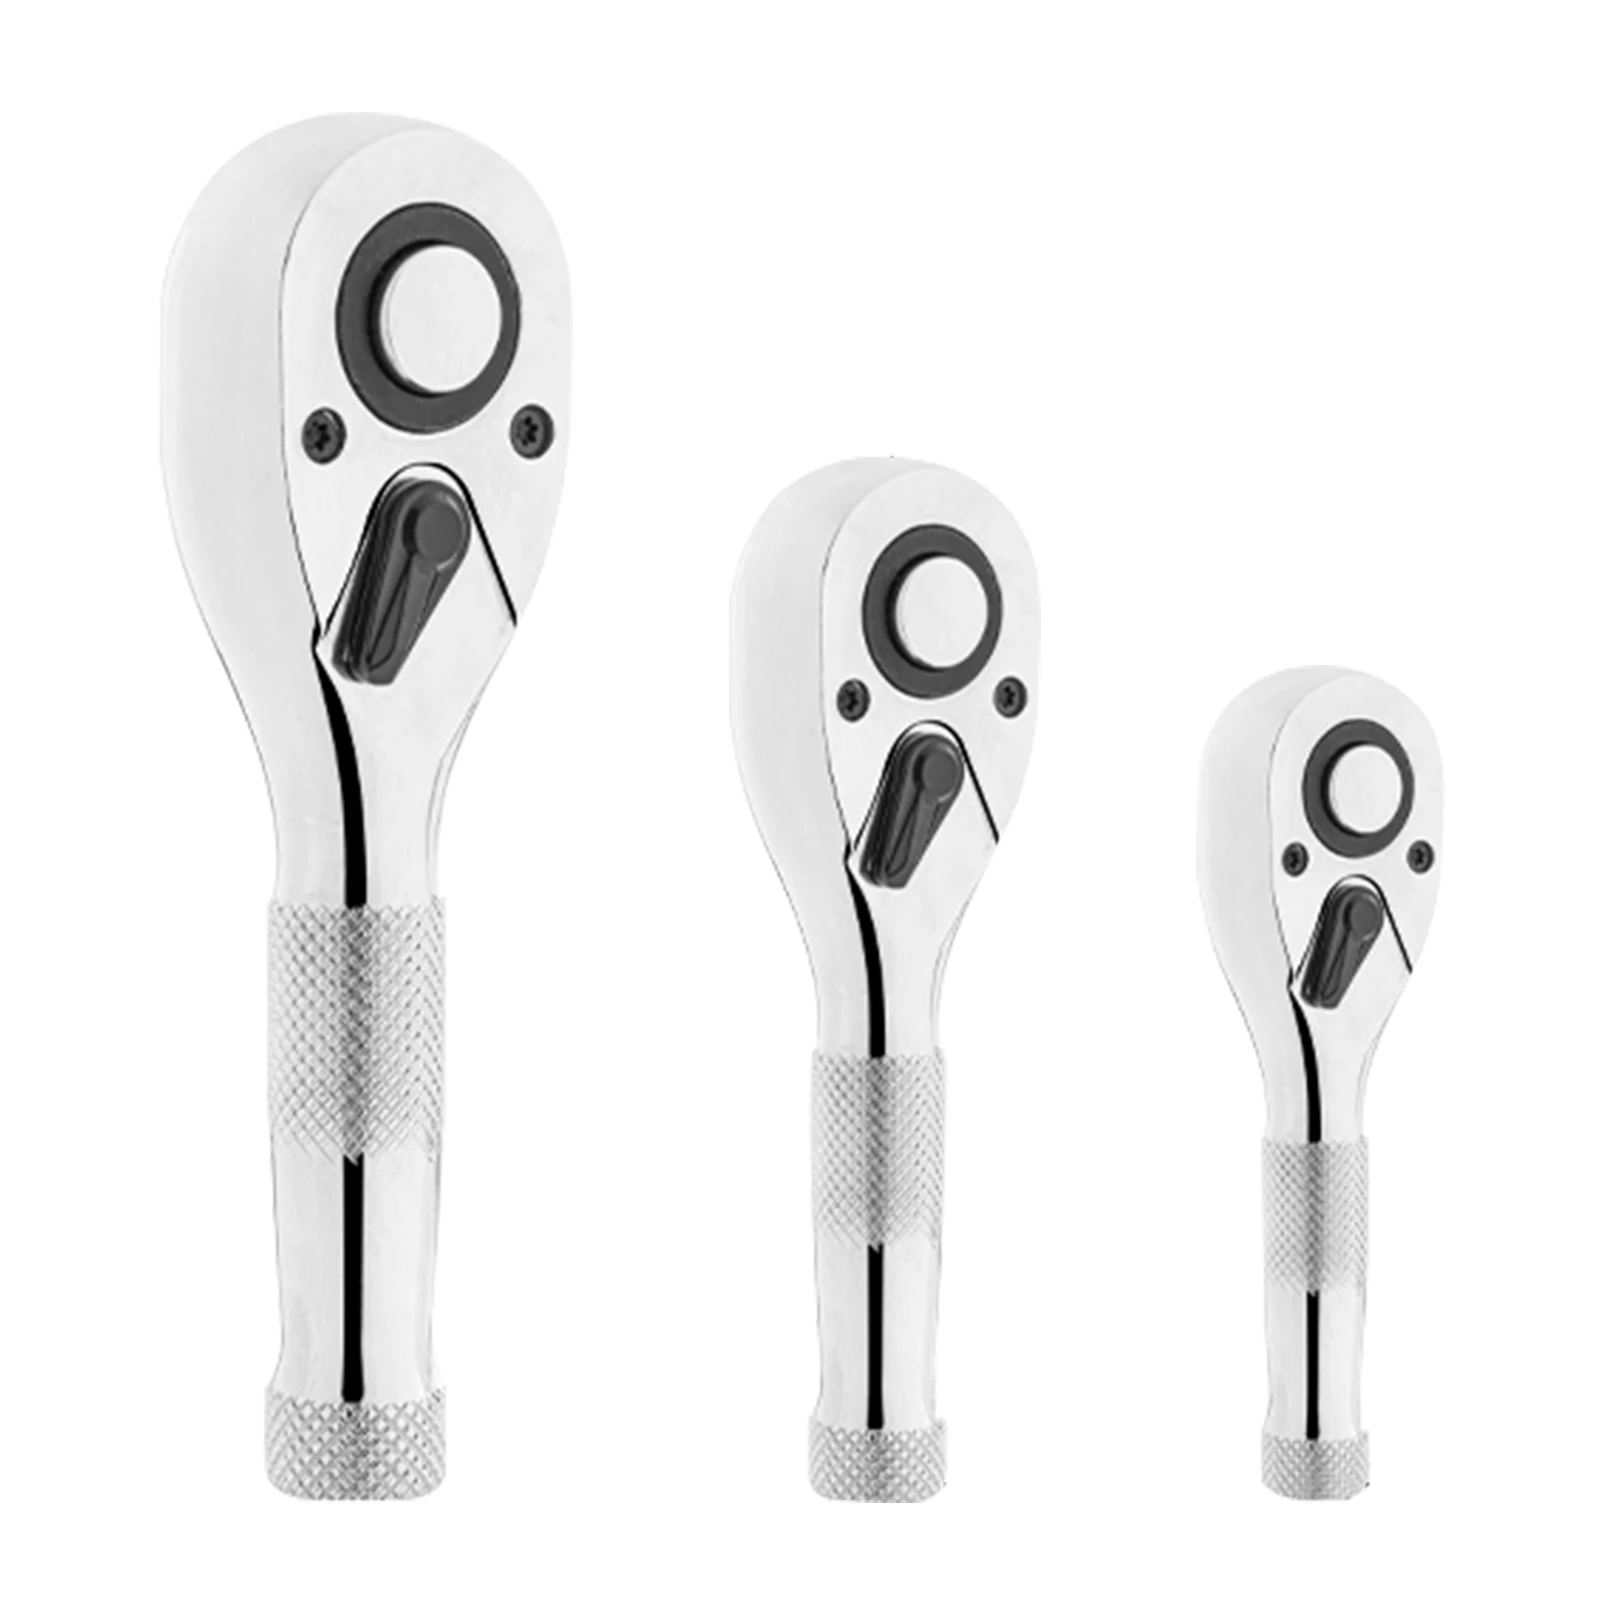 

3pcs 72 Tooth Portable Ratchet Wrench Durable Mini Professional Engine 1/4inch 3/8inch 1/2inch Drive Chrome Vanadium Steel Tool